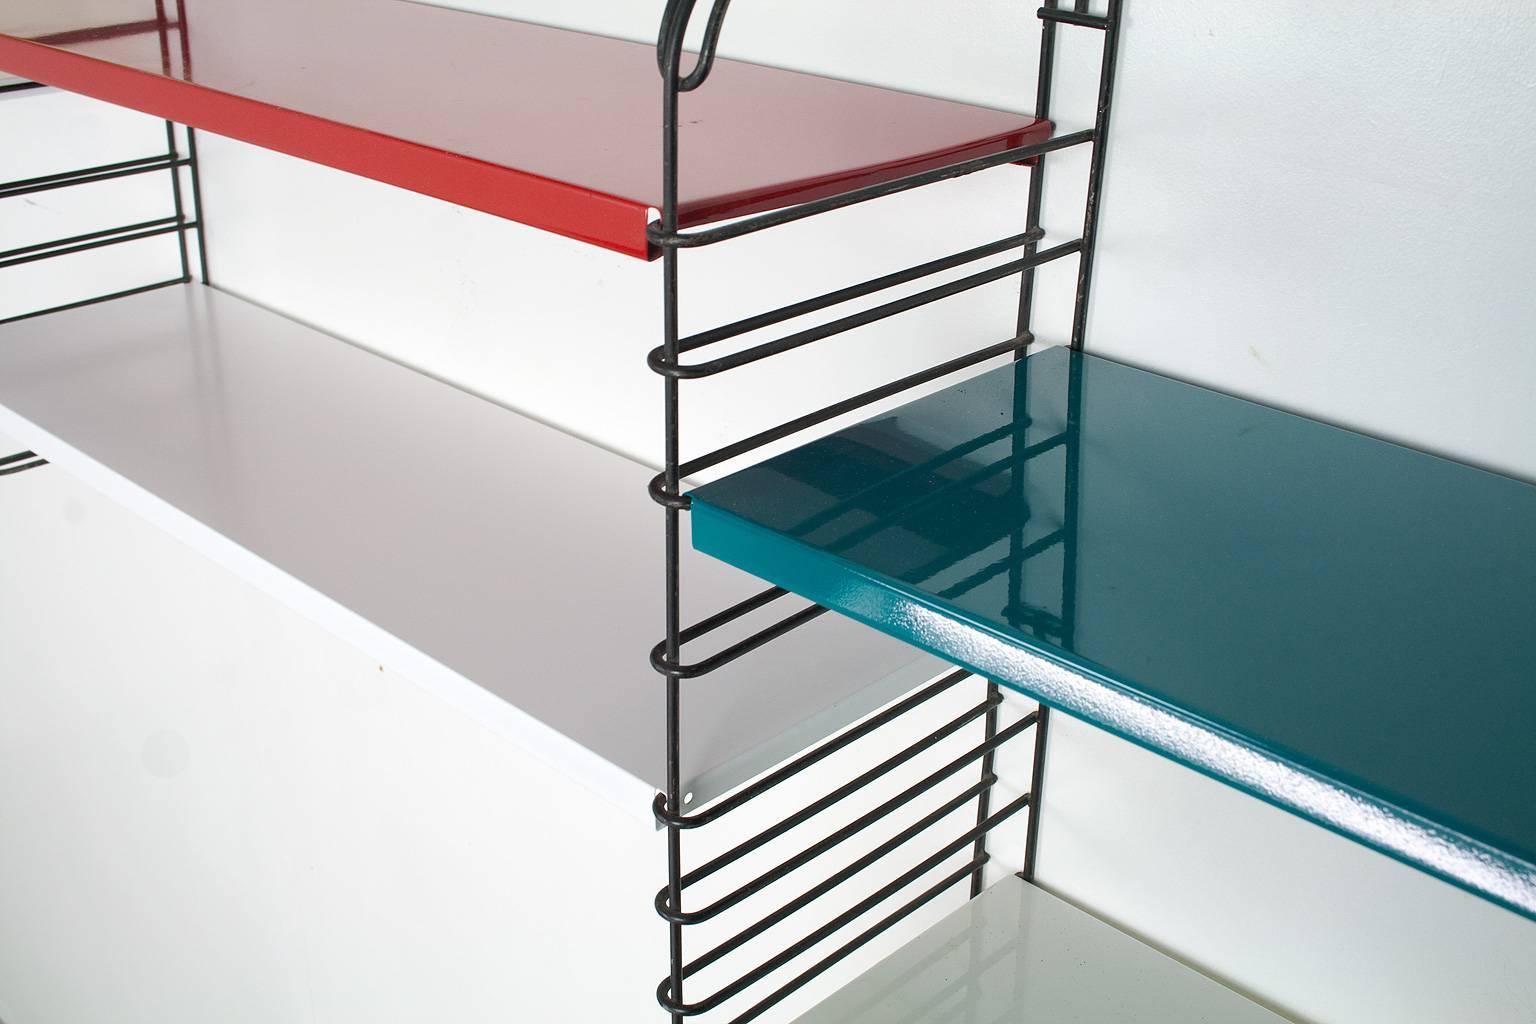 Beautiful industrial, modular wall unit with four black uprights and eight metal shelves in the colors white, red, yellow and teal. 

The colored shelves have been completely professionally restored with a satin gloss metal lacquer. The white